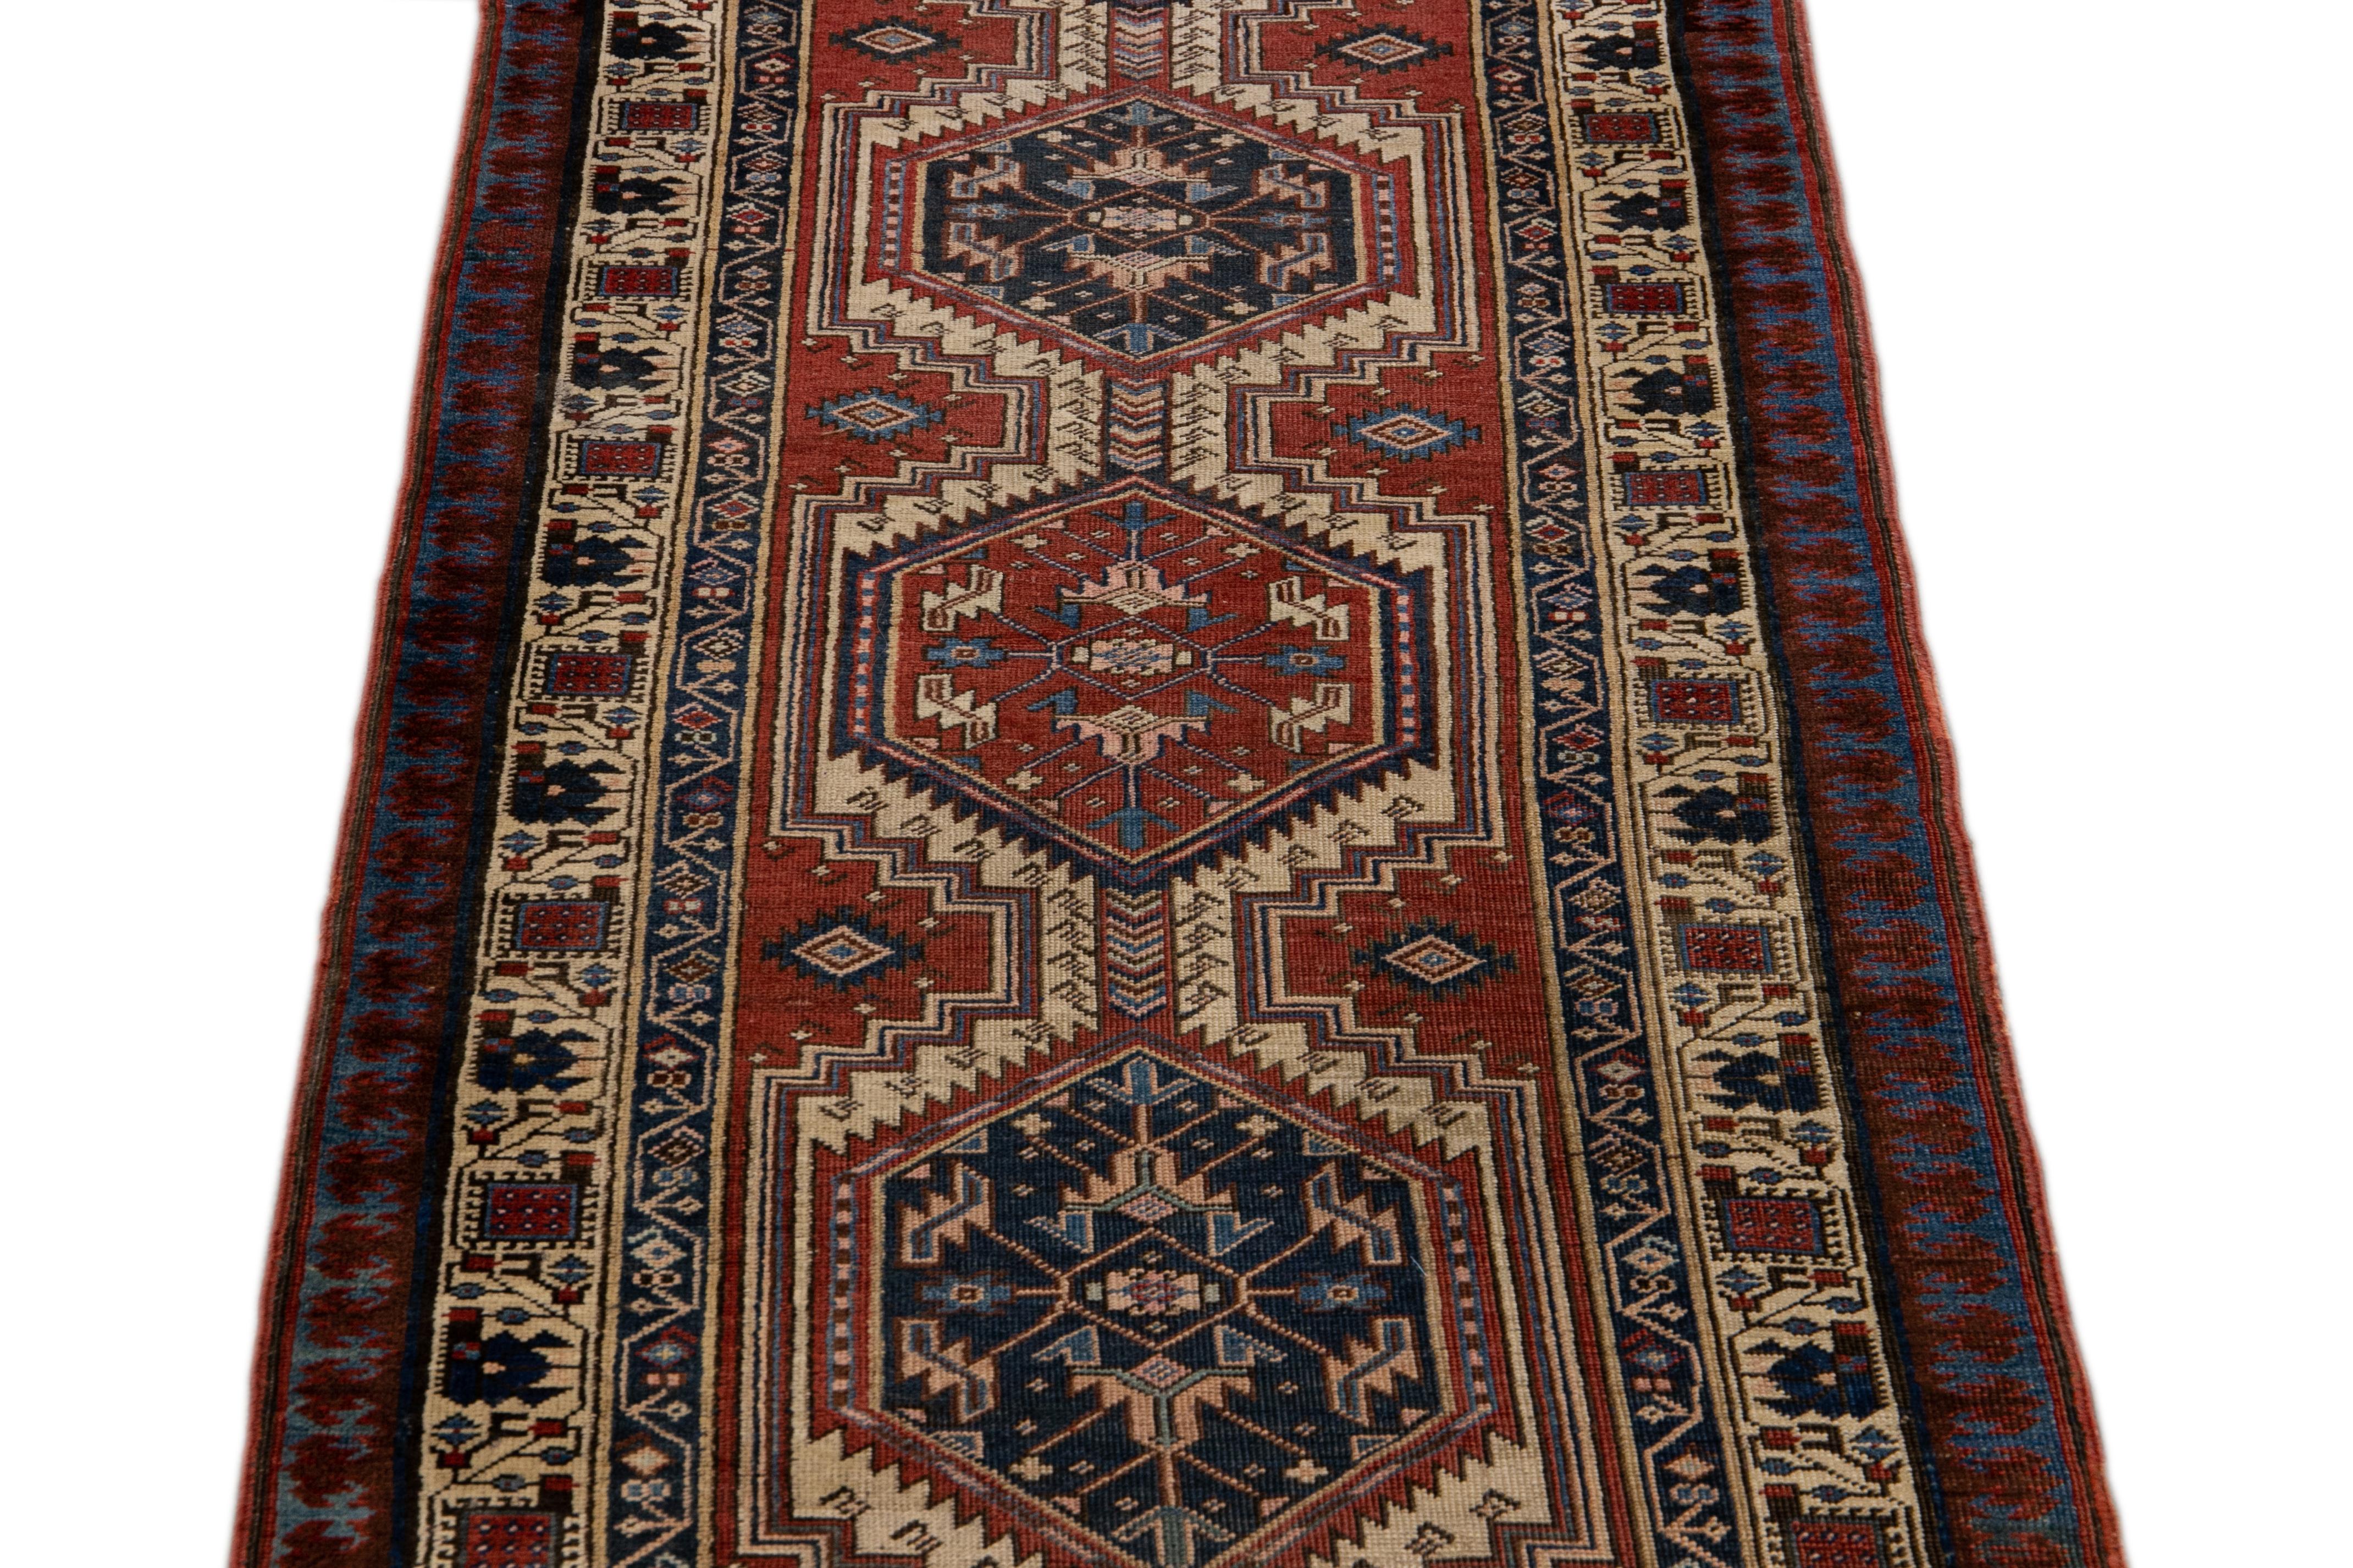 Beautiful antique Serab hand-knotted wool runner with a rust field. This Persian rug has a beige frame and multicolor accents in a gorgeous all-over geometric tribal design.

This rug measures: 3'3